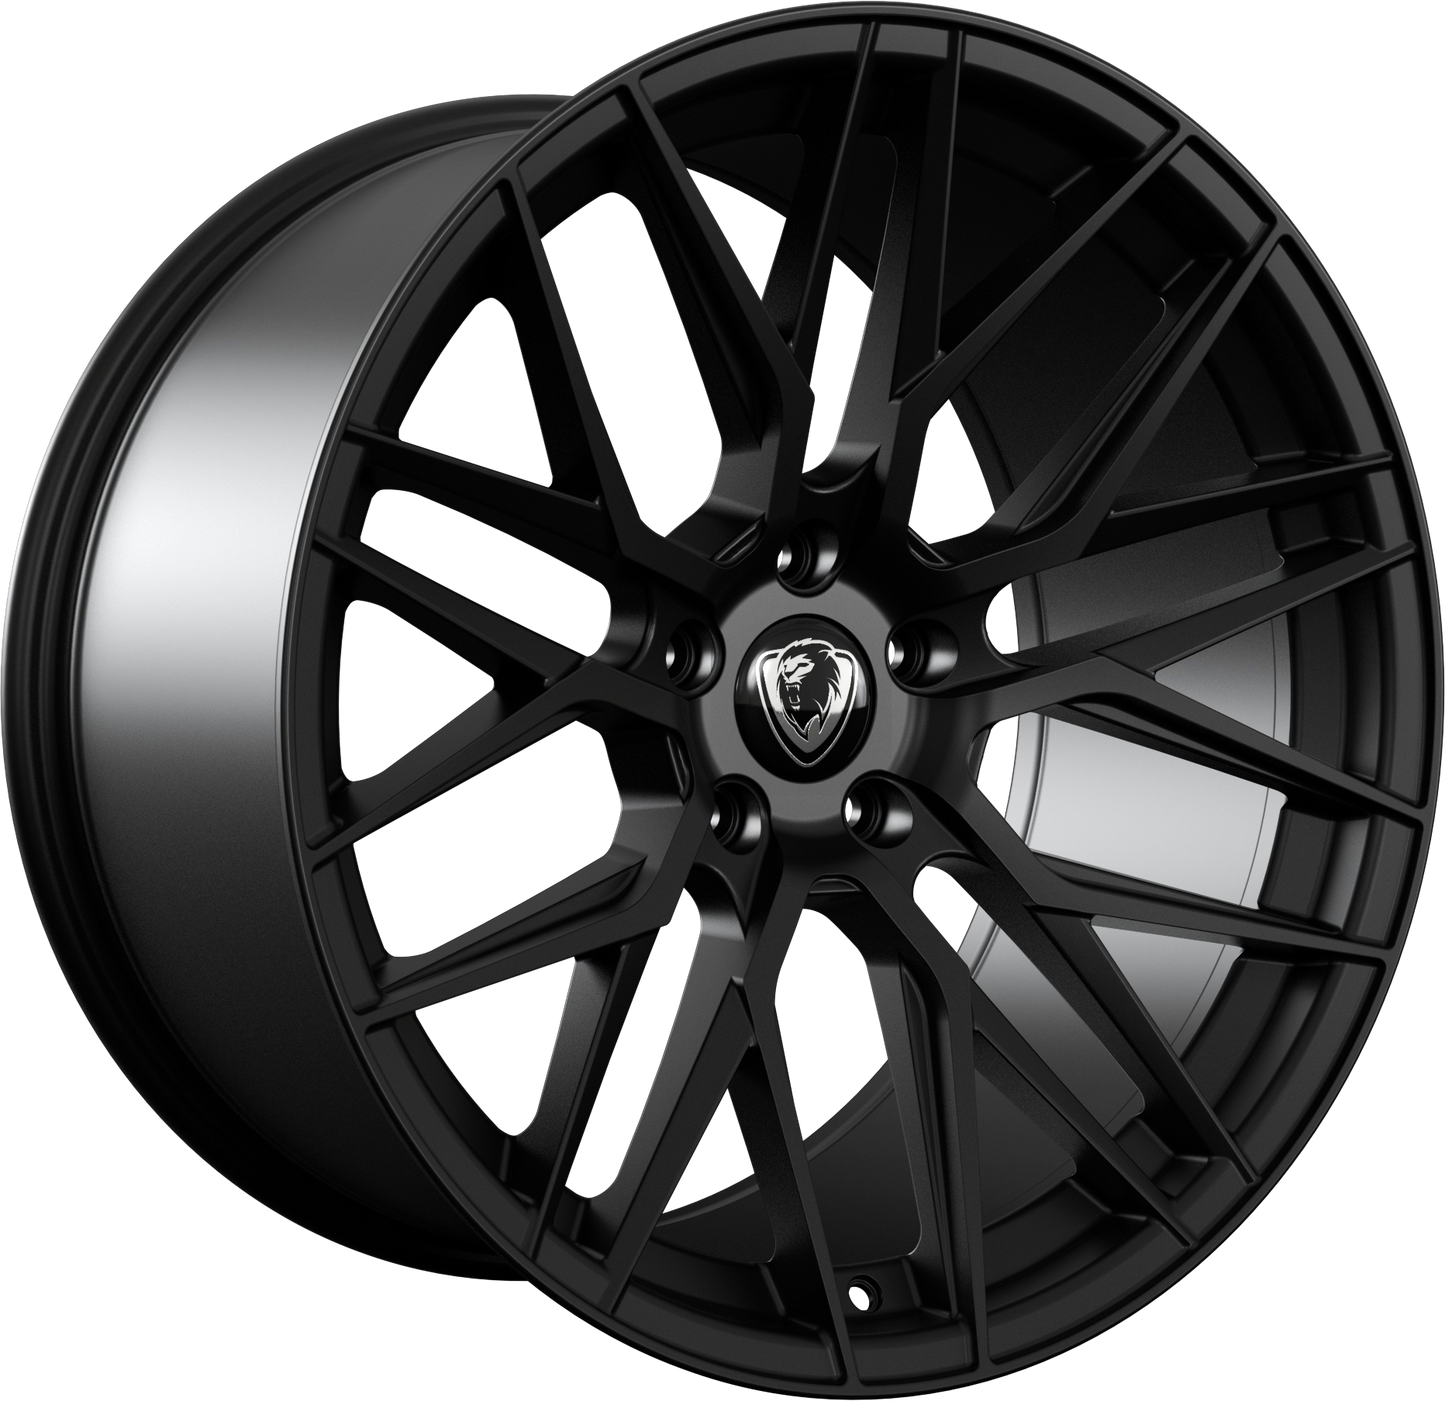 Cades, Hera Wheel Package for the Tesla Model 3